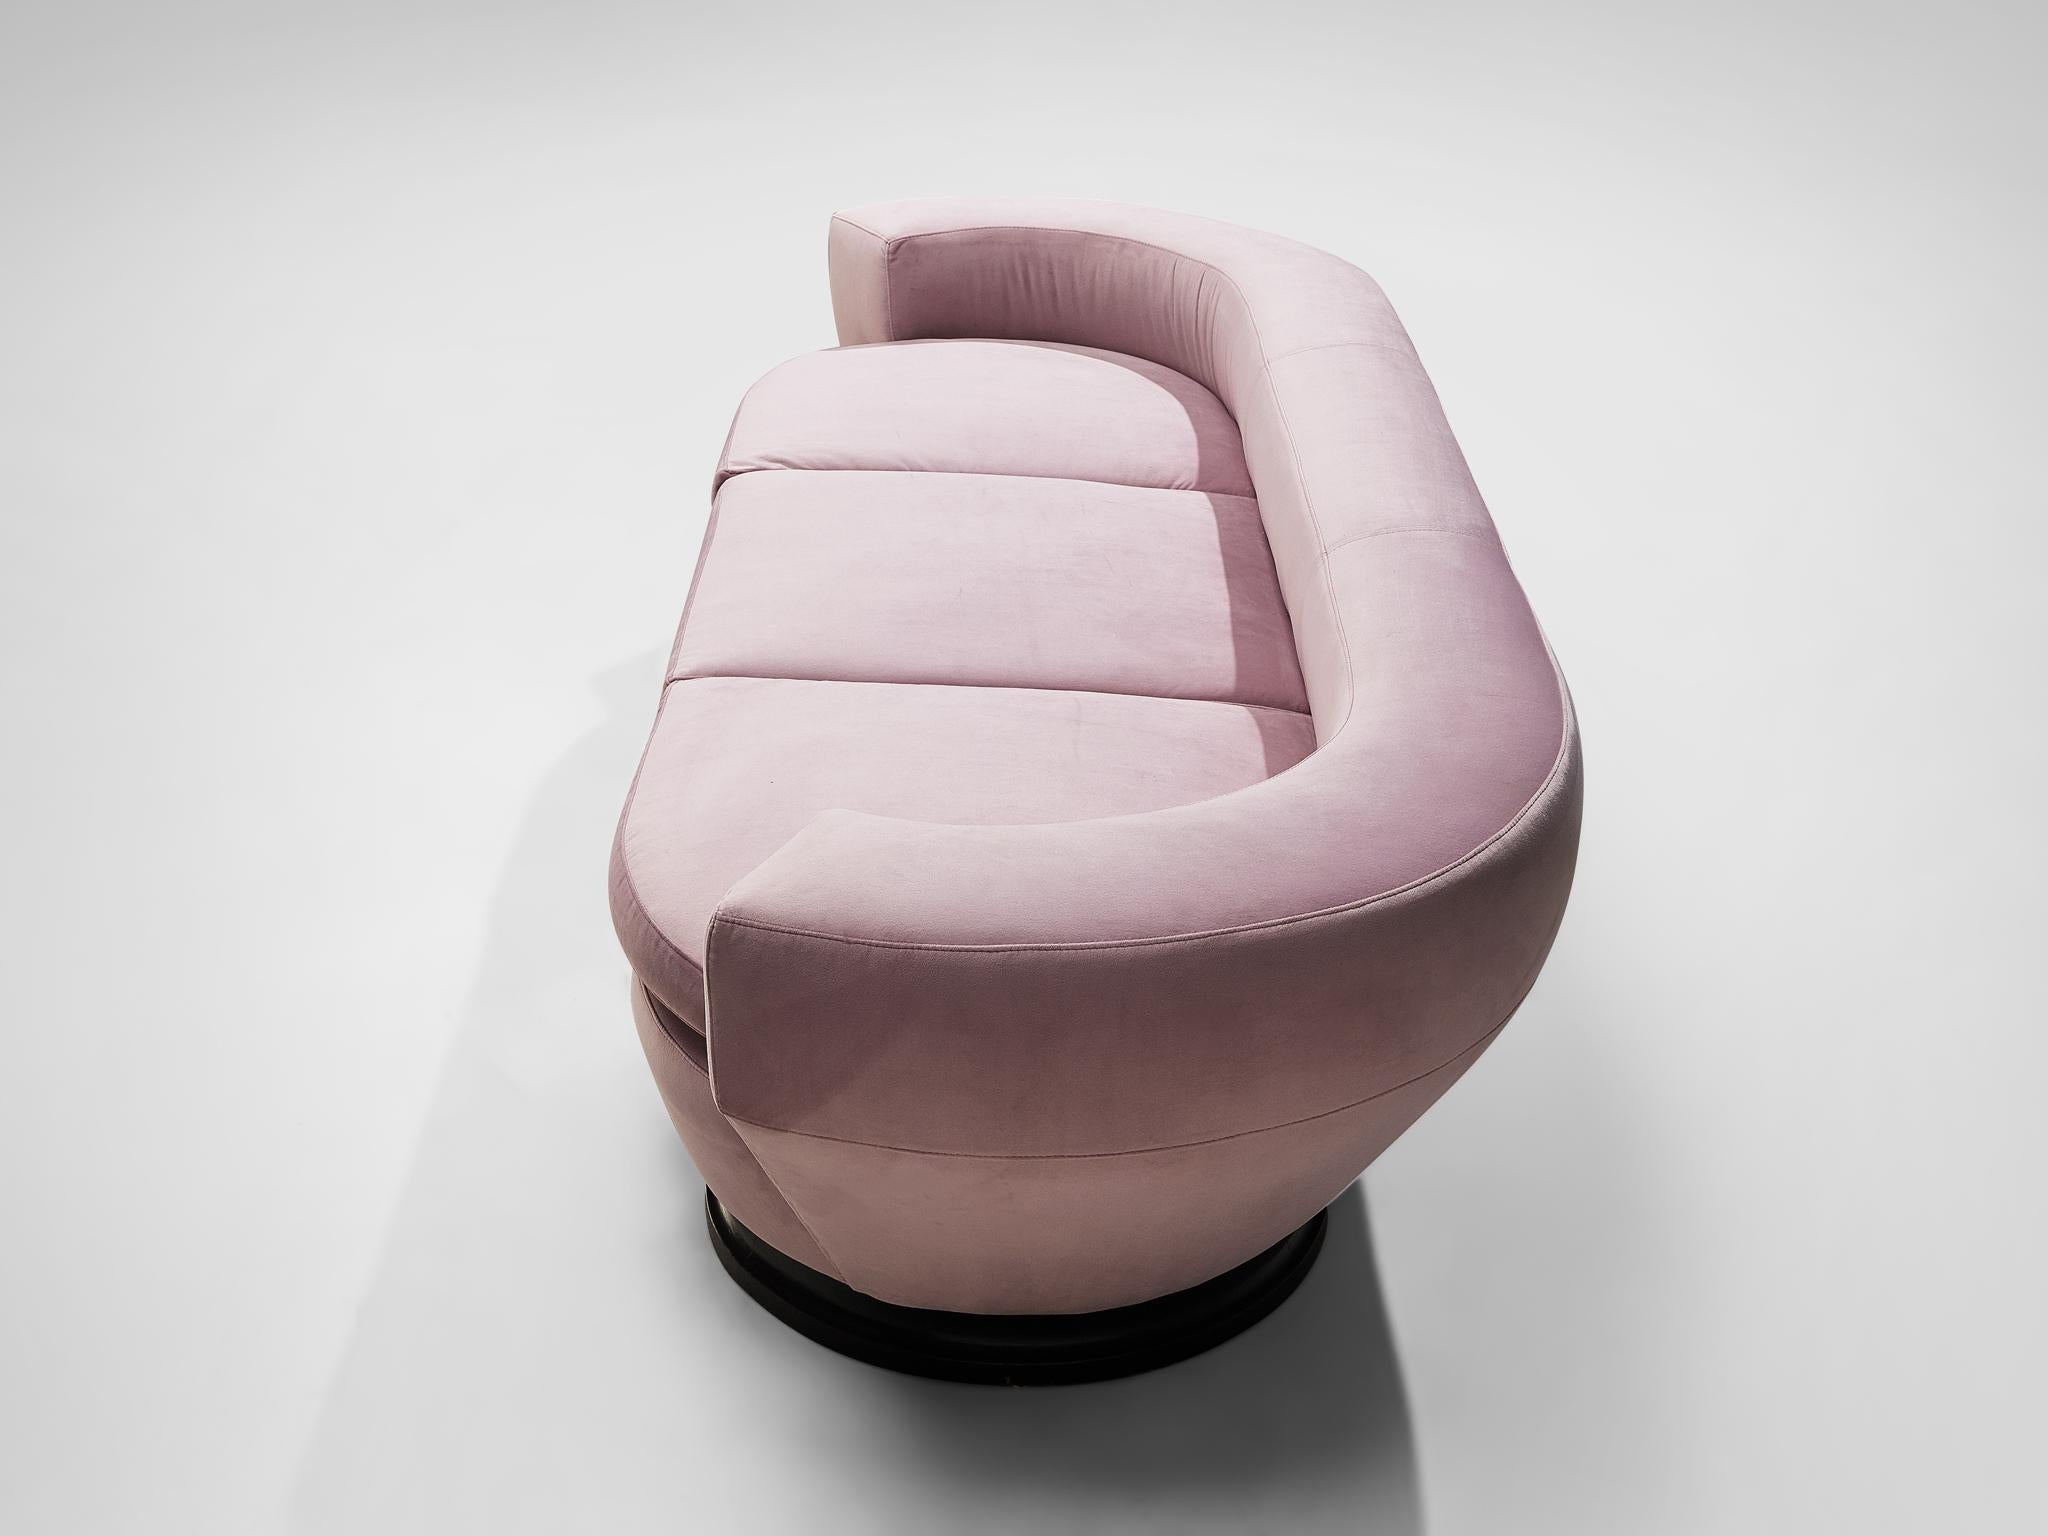 Mid-20th Century Italian Sofa in Soft Pink Ultrasuede